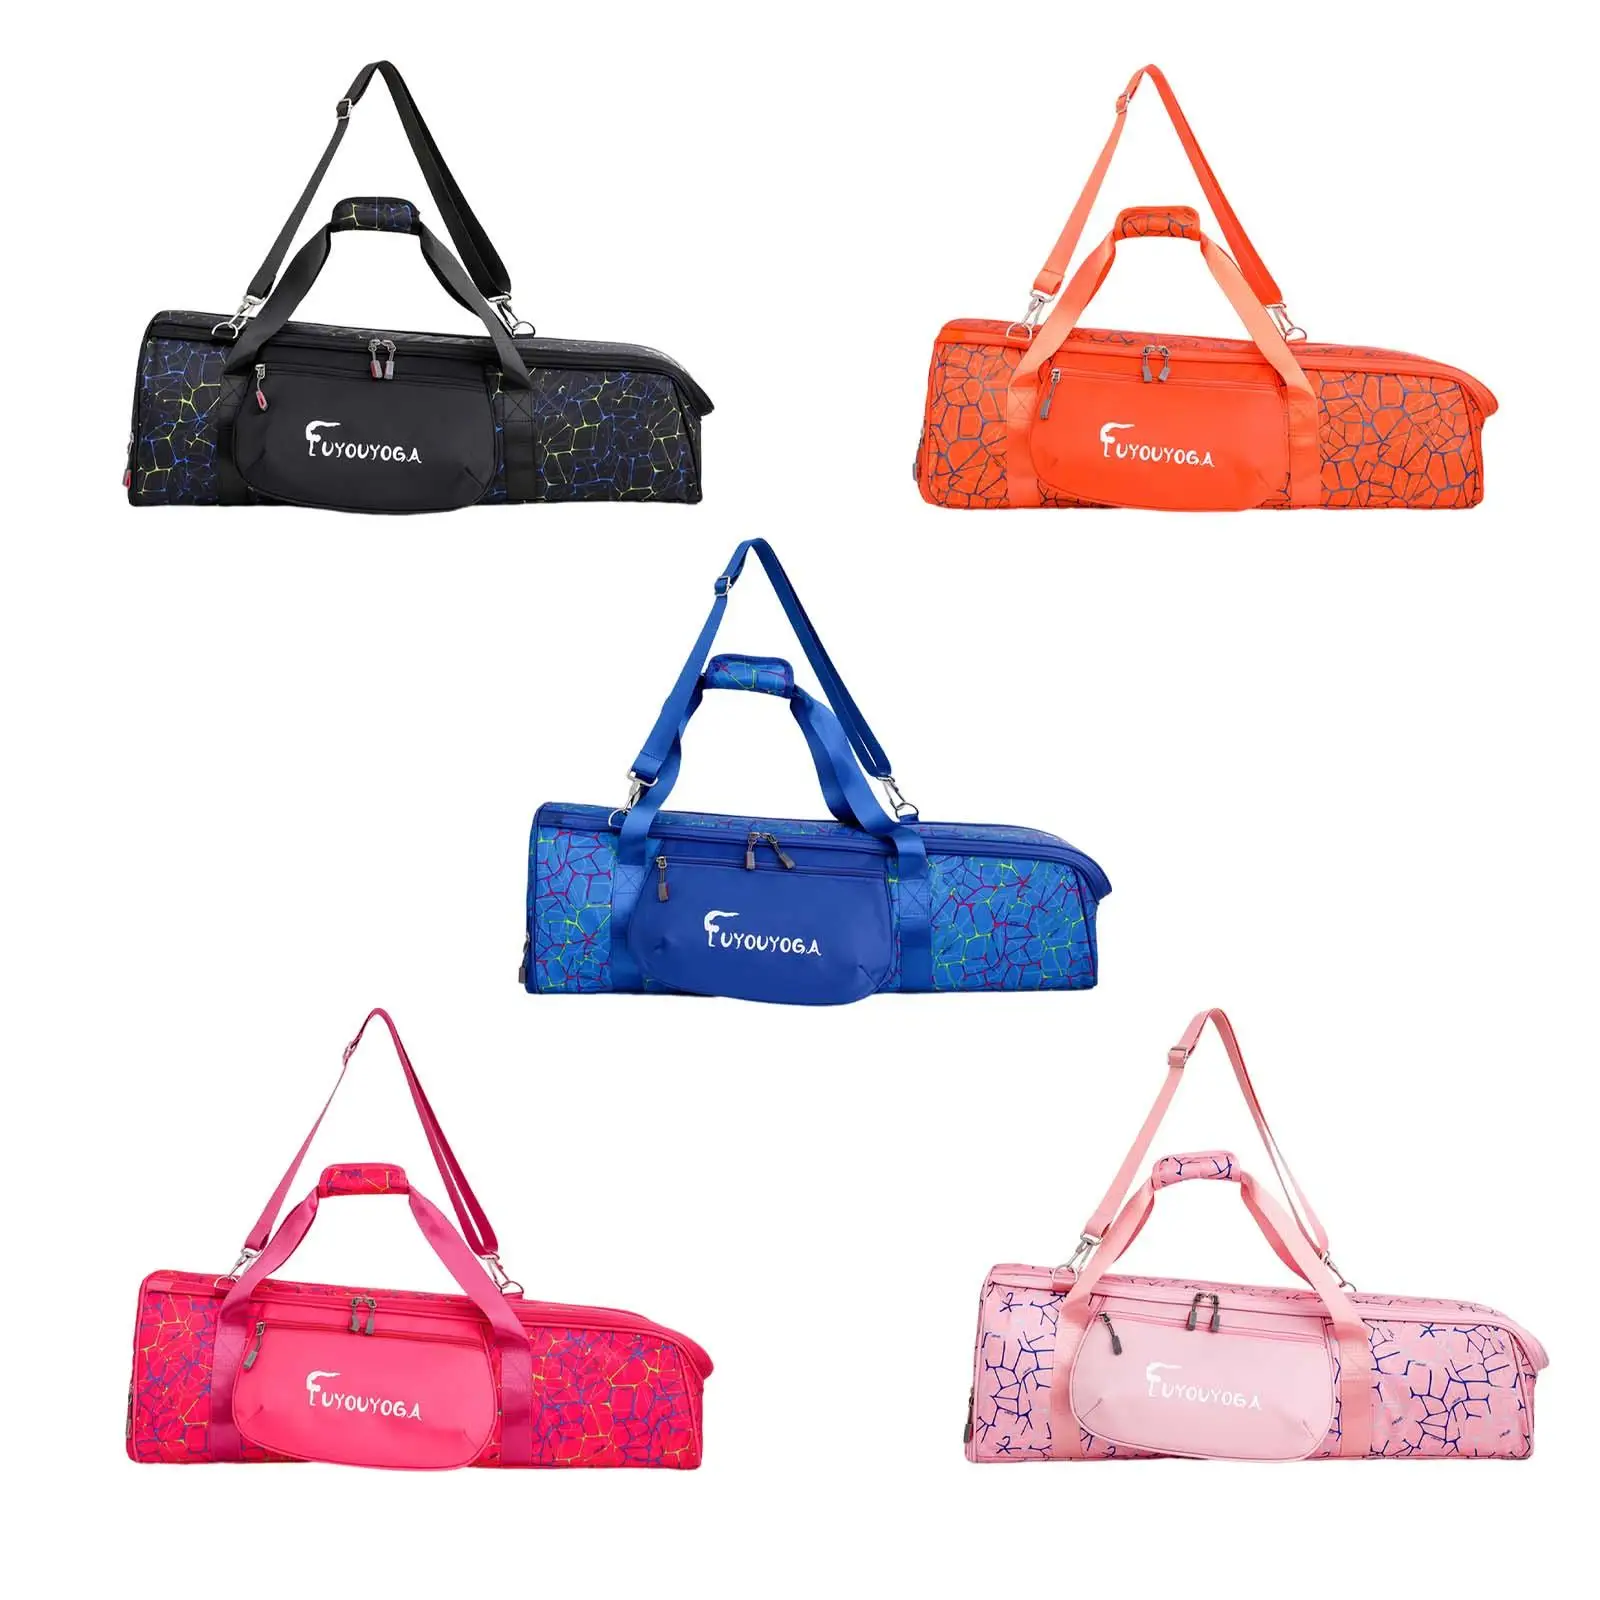 Yoga Mat Carrier Case Gym Tote with Handle Knapsack Multifunctional Large Yoga Bags for Gym Dancing Outdoor Pilates Women Men